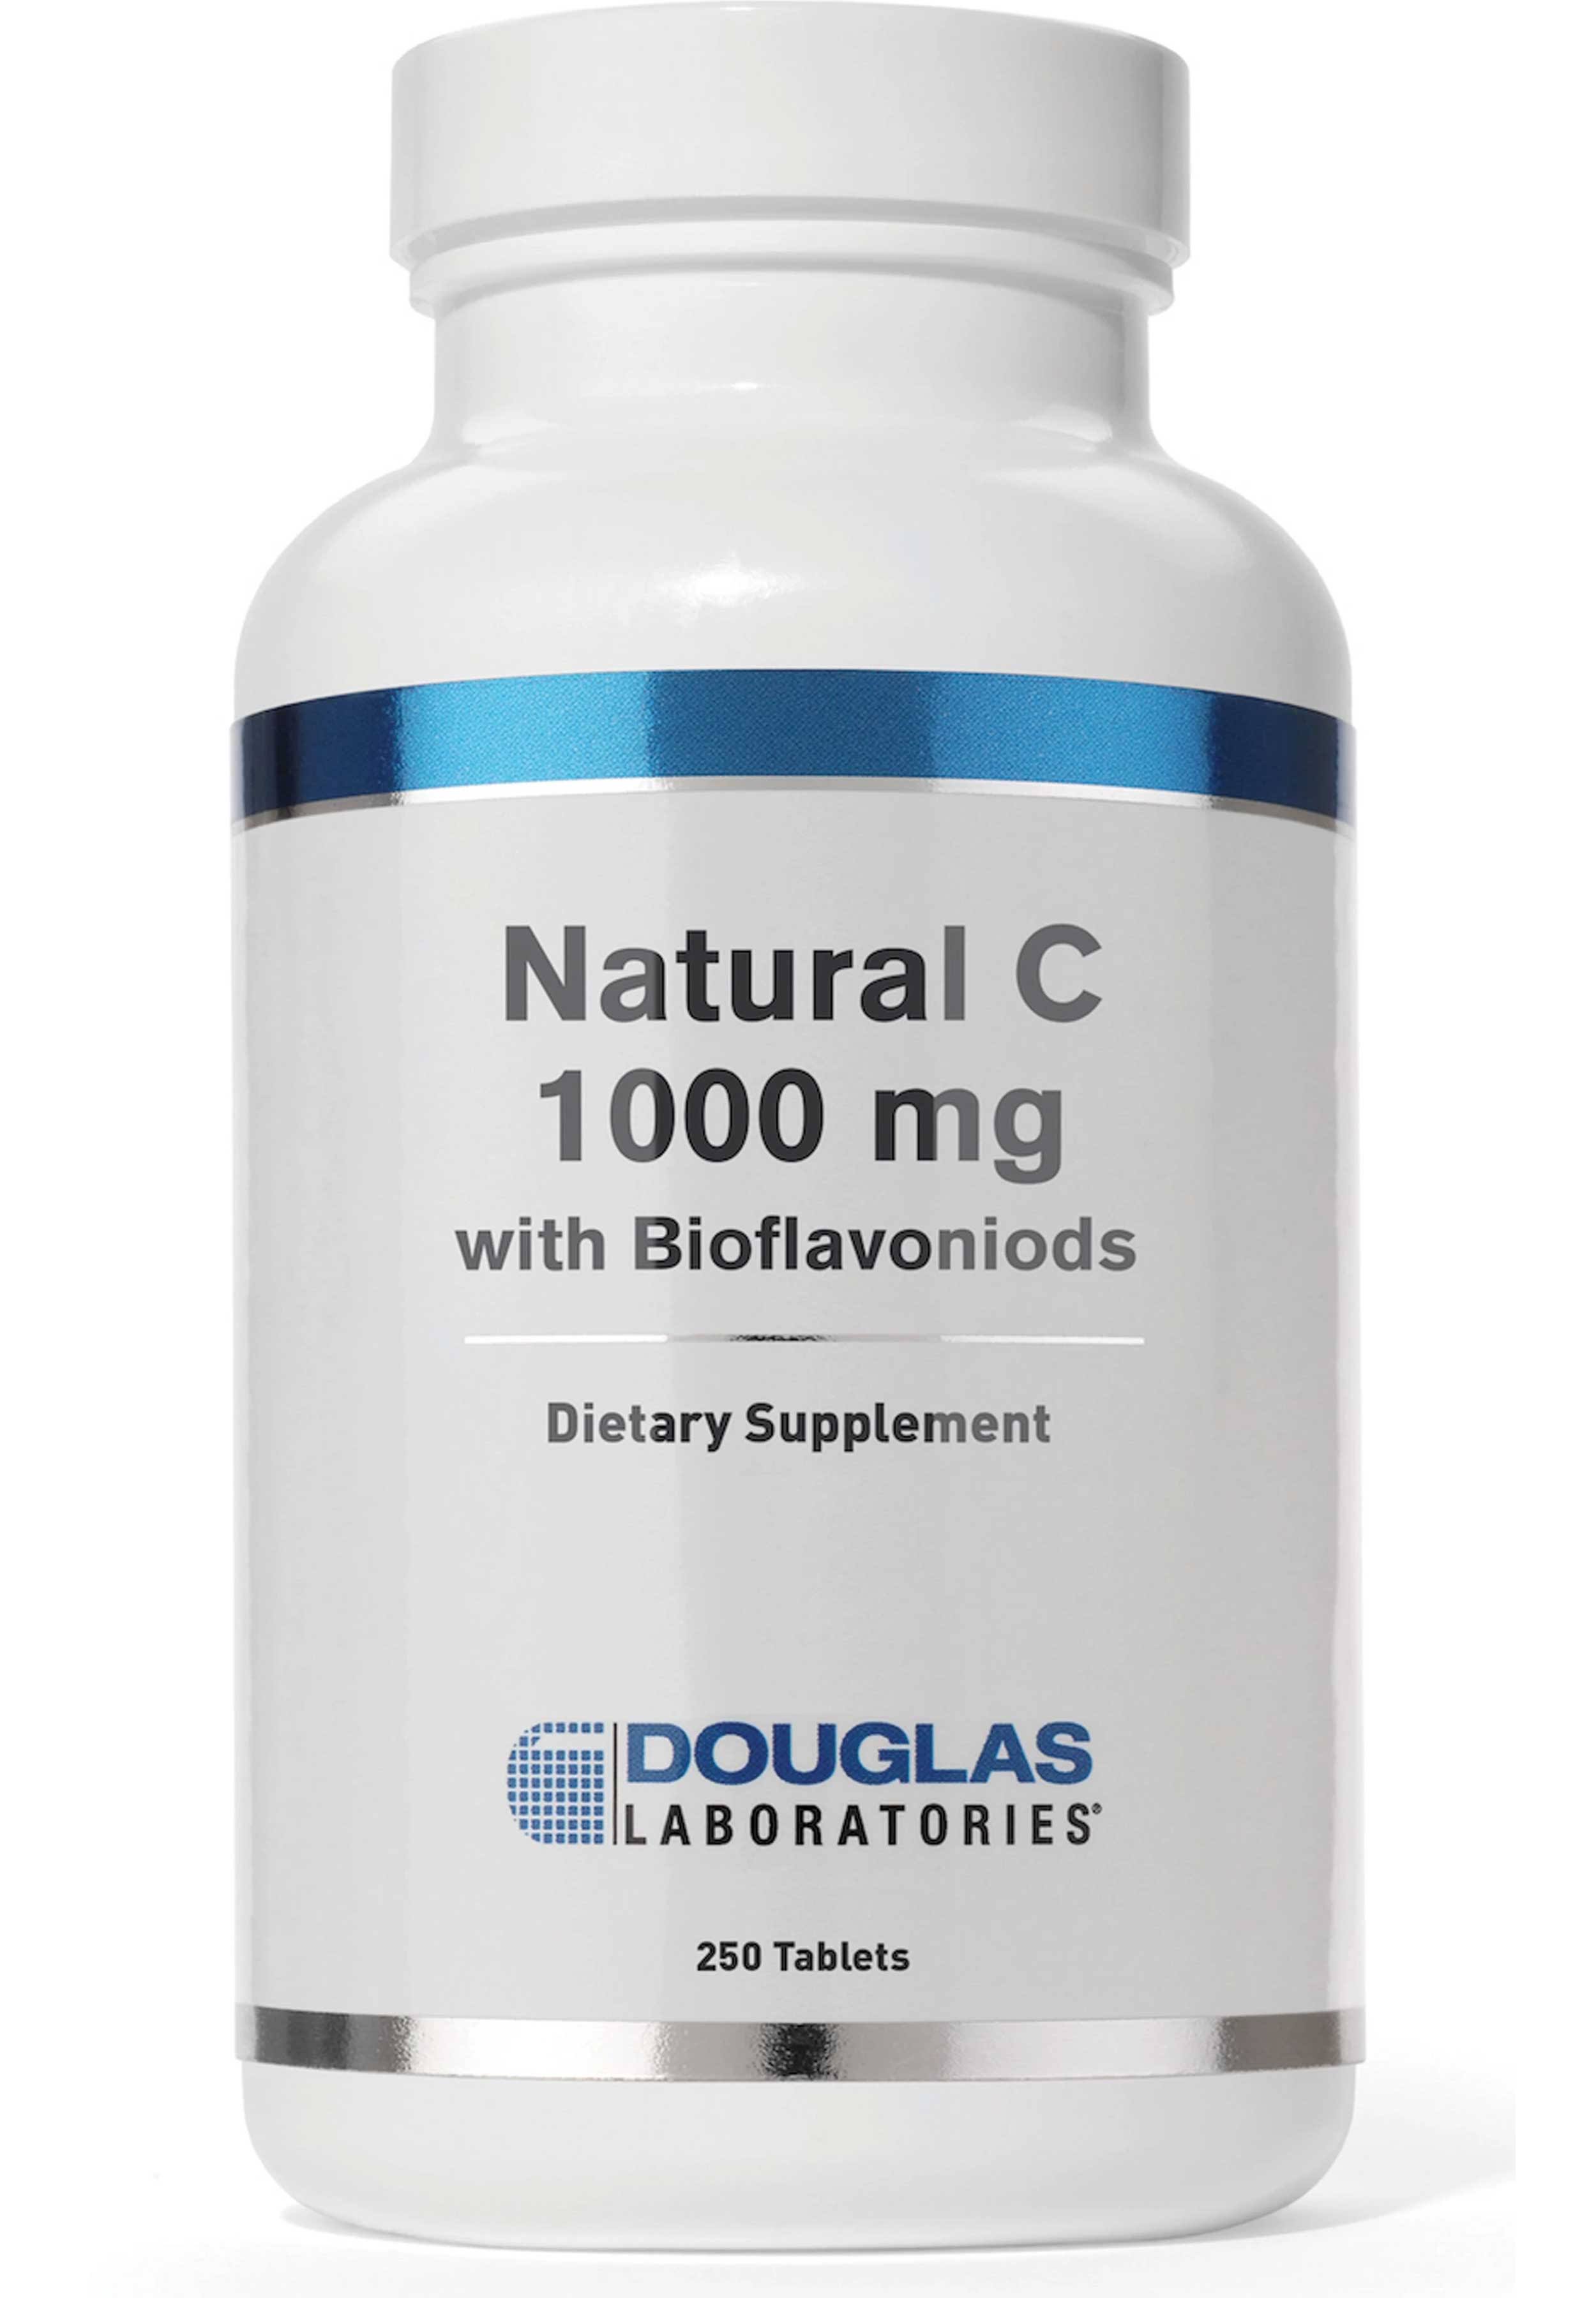 Douglas Labs Natural C Dietary Supplement - 1000mg, 100ct